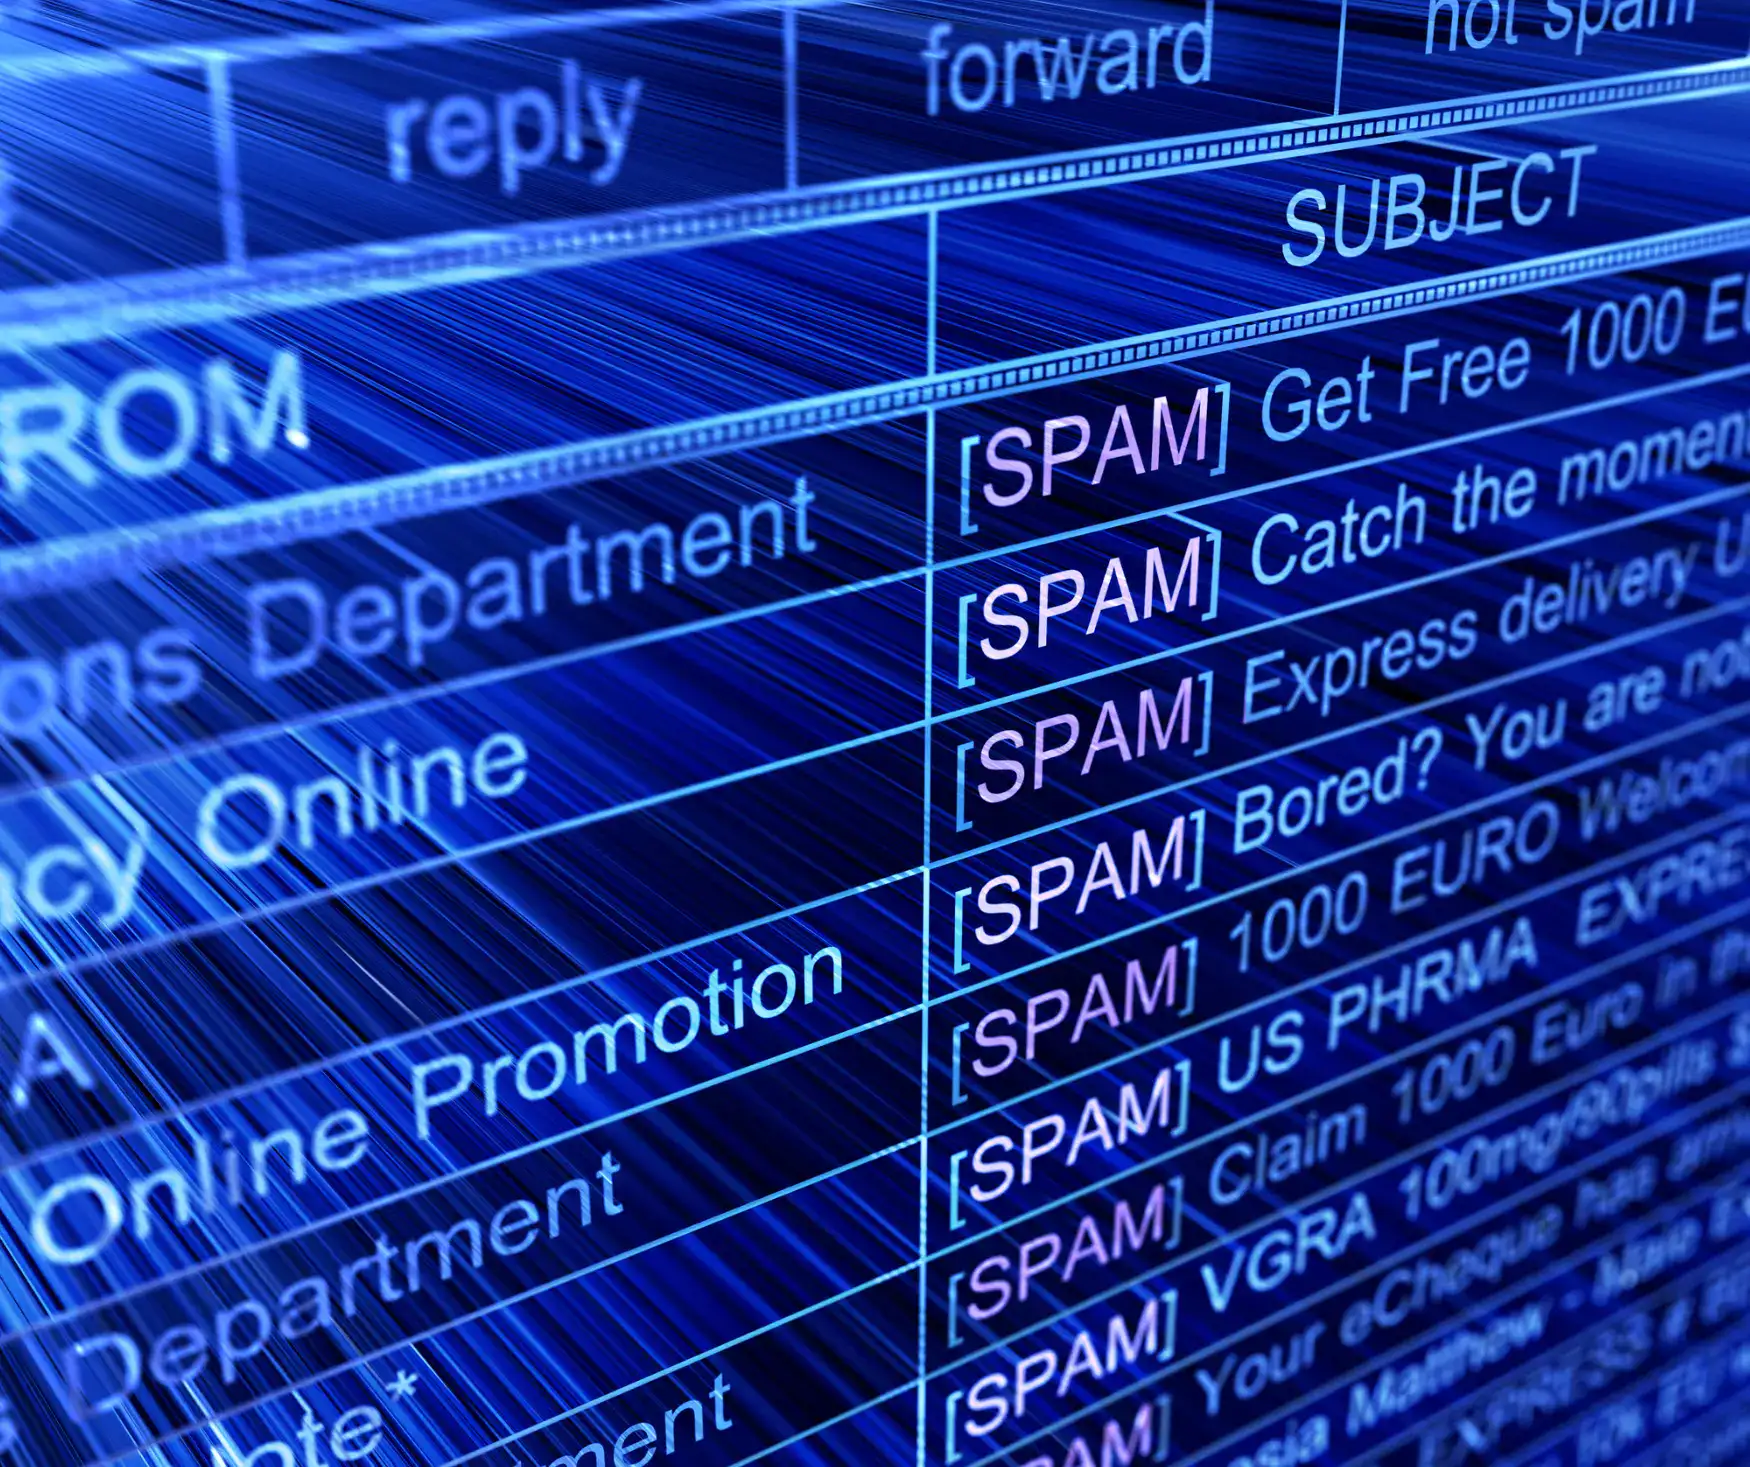 Tactics To Fight Distributed Spam Distraction and Protect Your Productivity